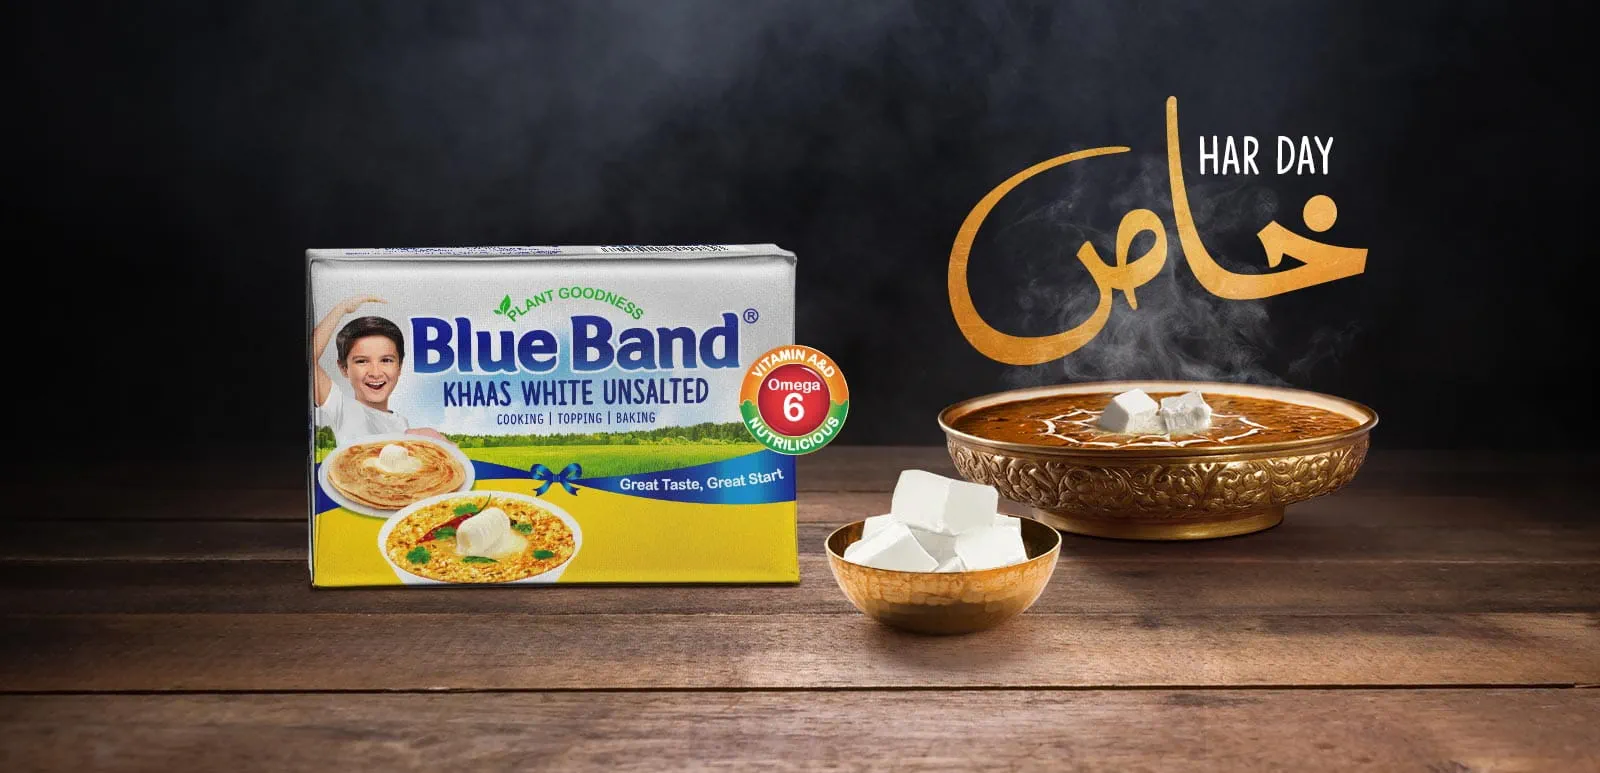 Home Page, Blue Band Pakistan's Official Website